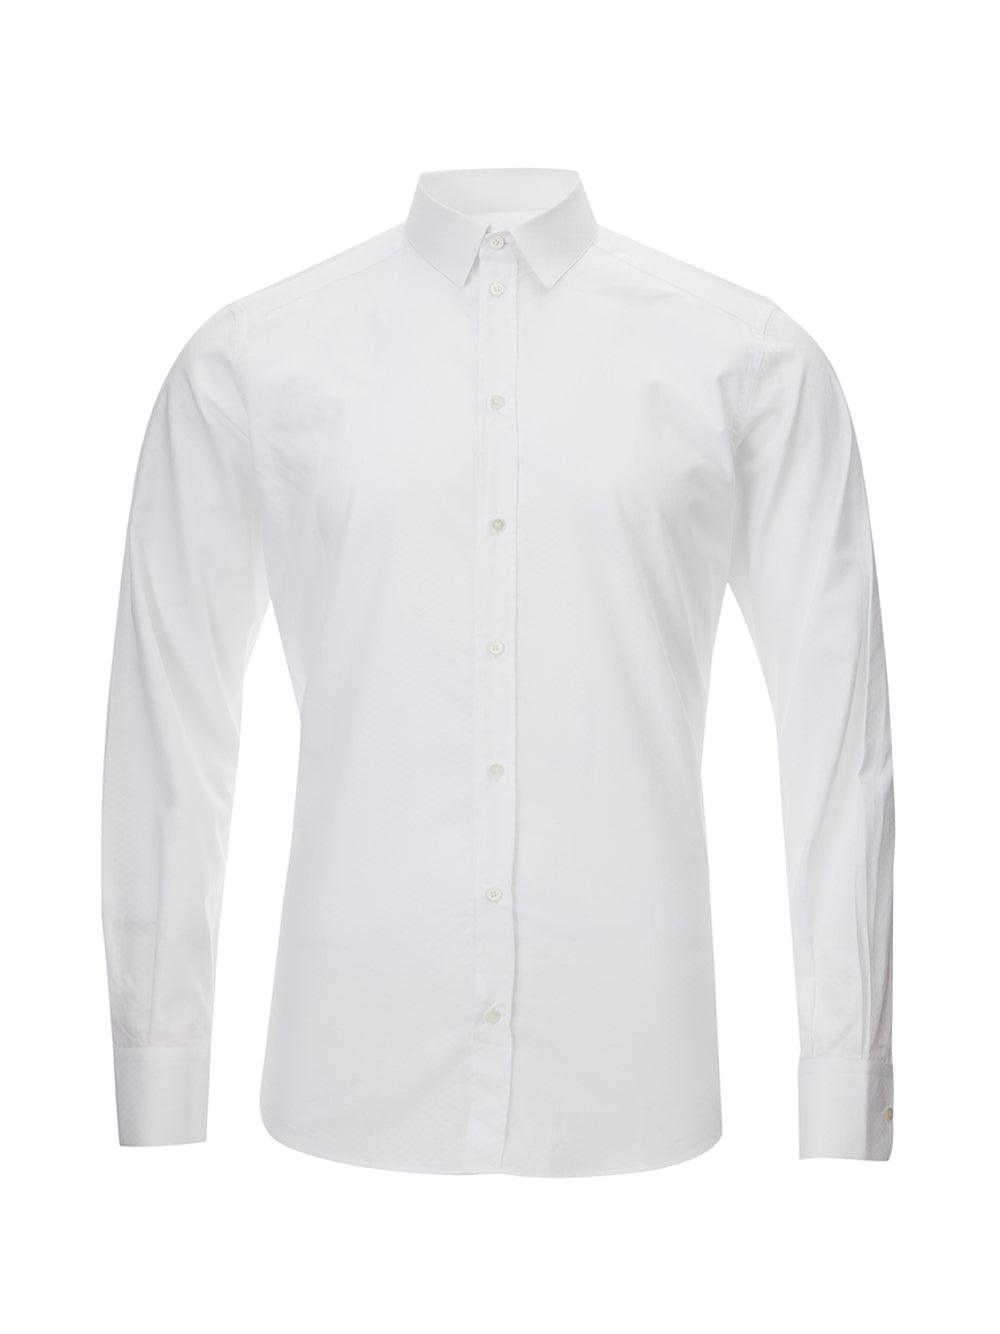 Dolce & Gabbana White Cotton Shirt with Micro Honeycomb detail - Ellie Belle